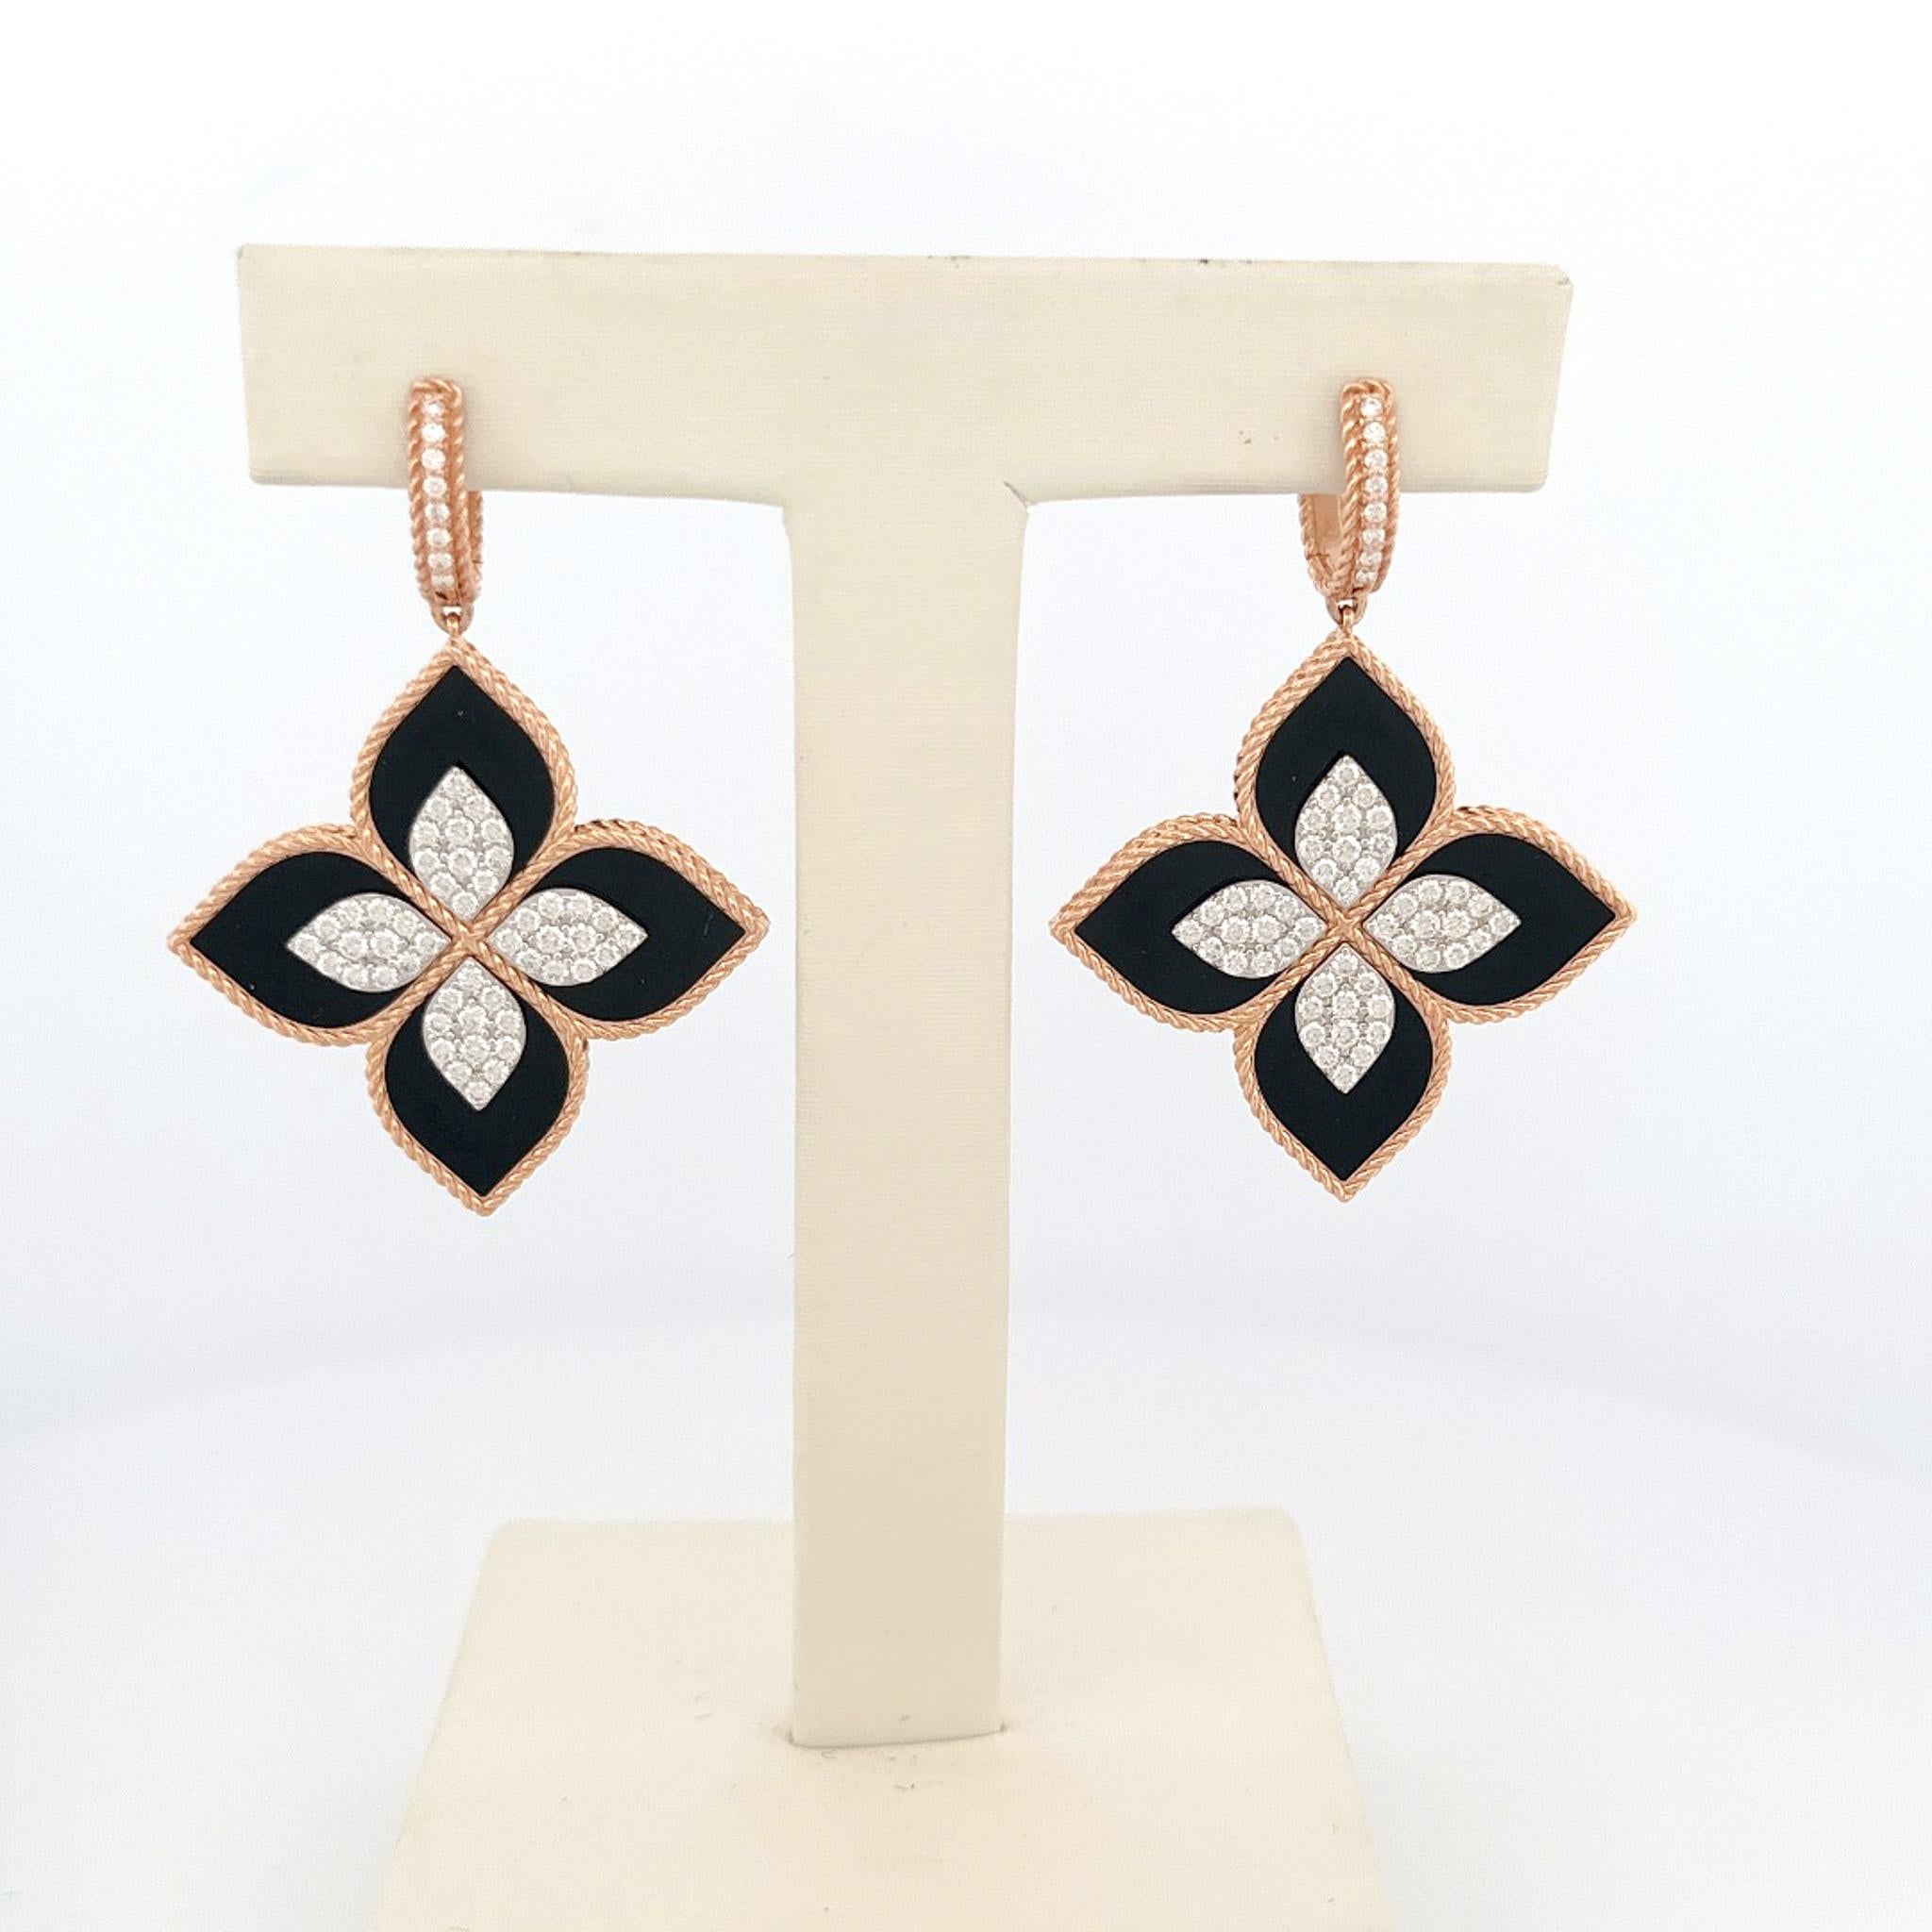 From designer Roberto Coin's Venetian Princess Collection, 18 karat rose gold black jade and diamond earrings. These earrings are crafted with 56 round brilliant cut diamonds with a total combined weight of 1.48 carats. These diamonds have GH color